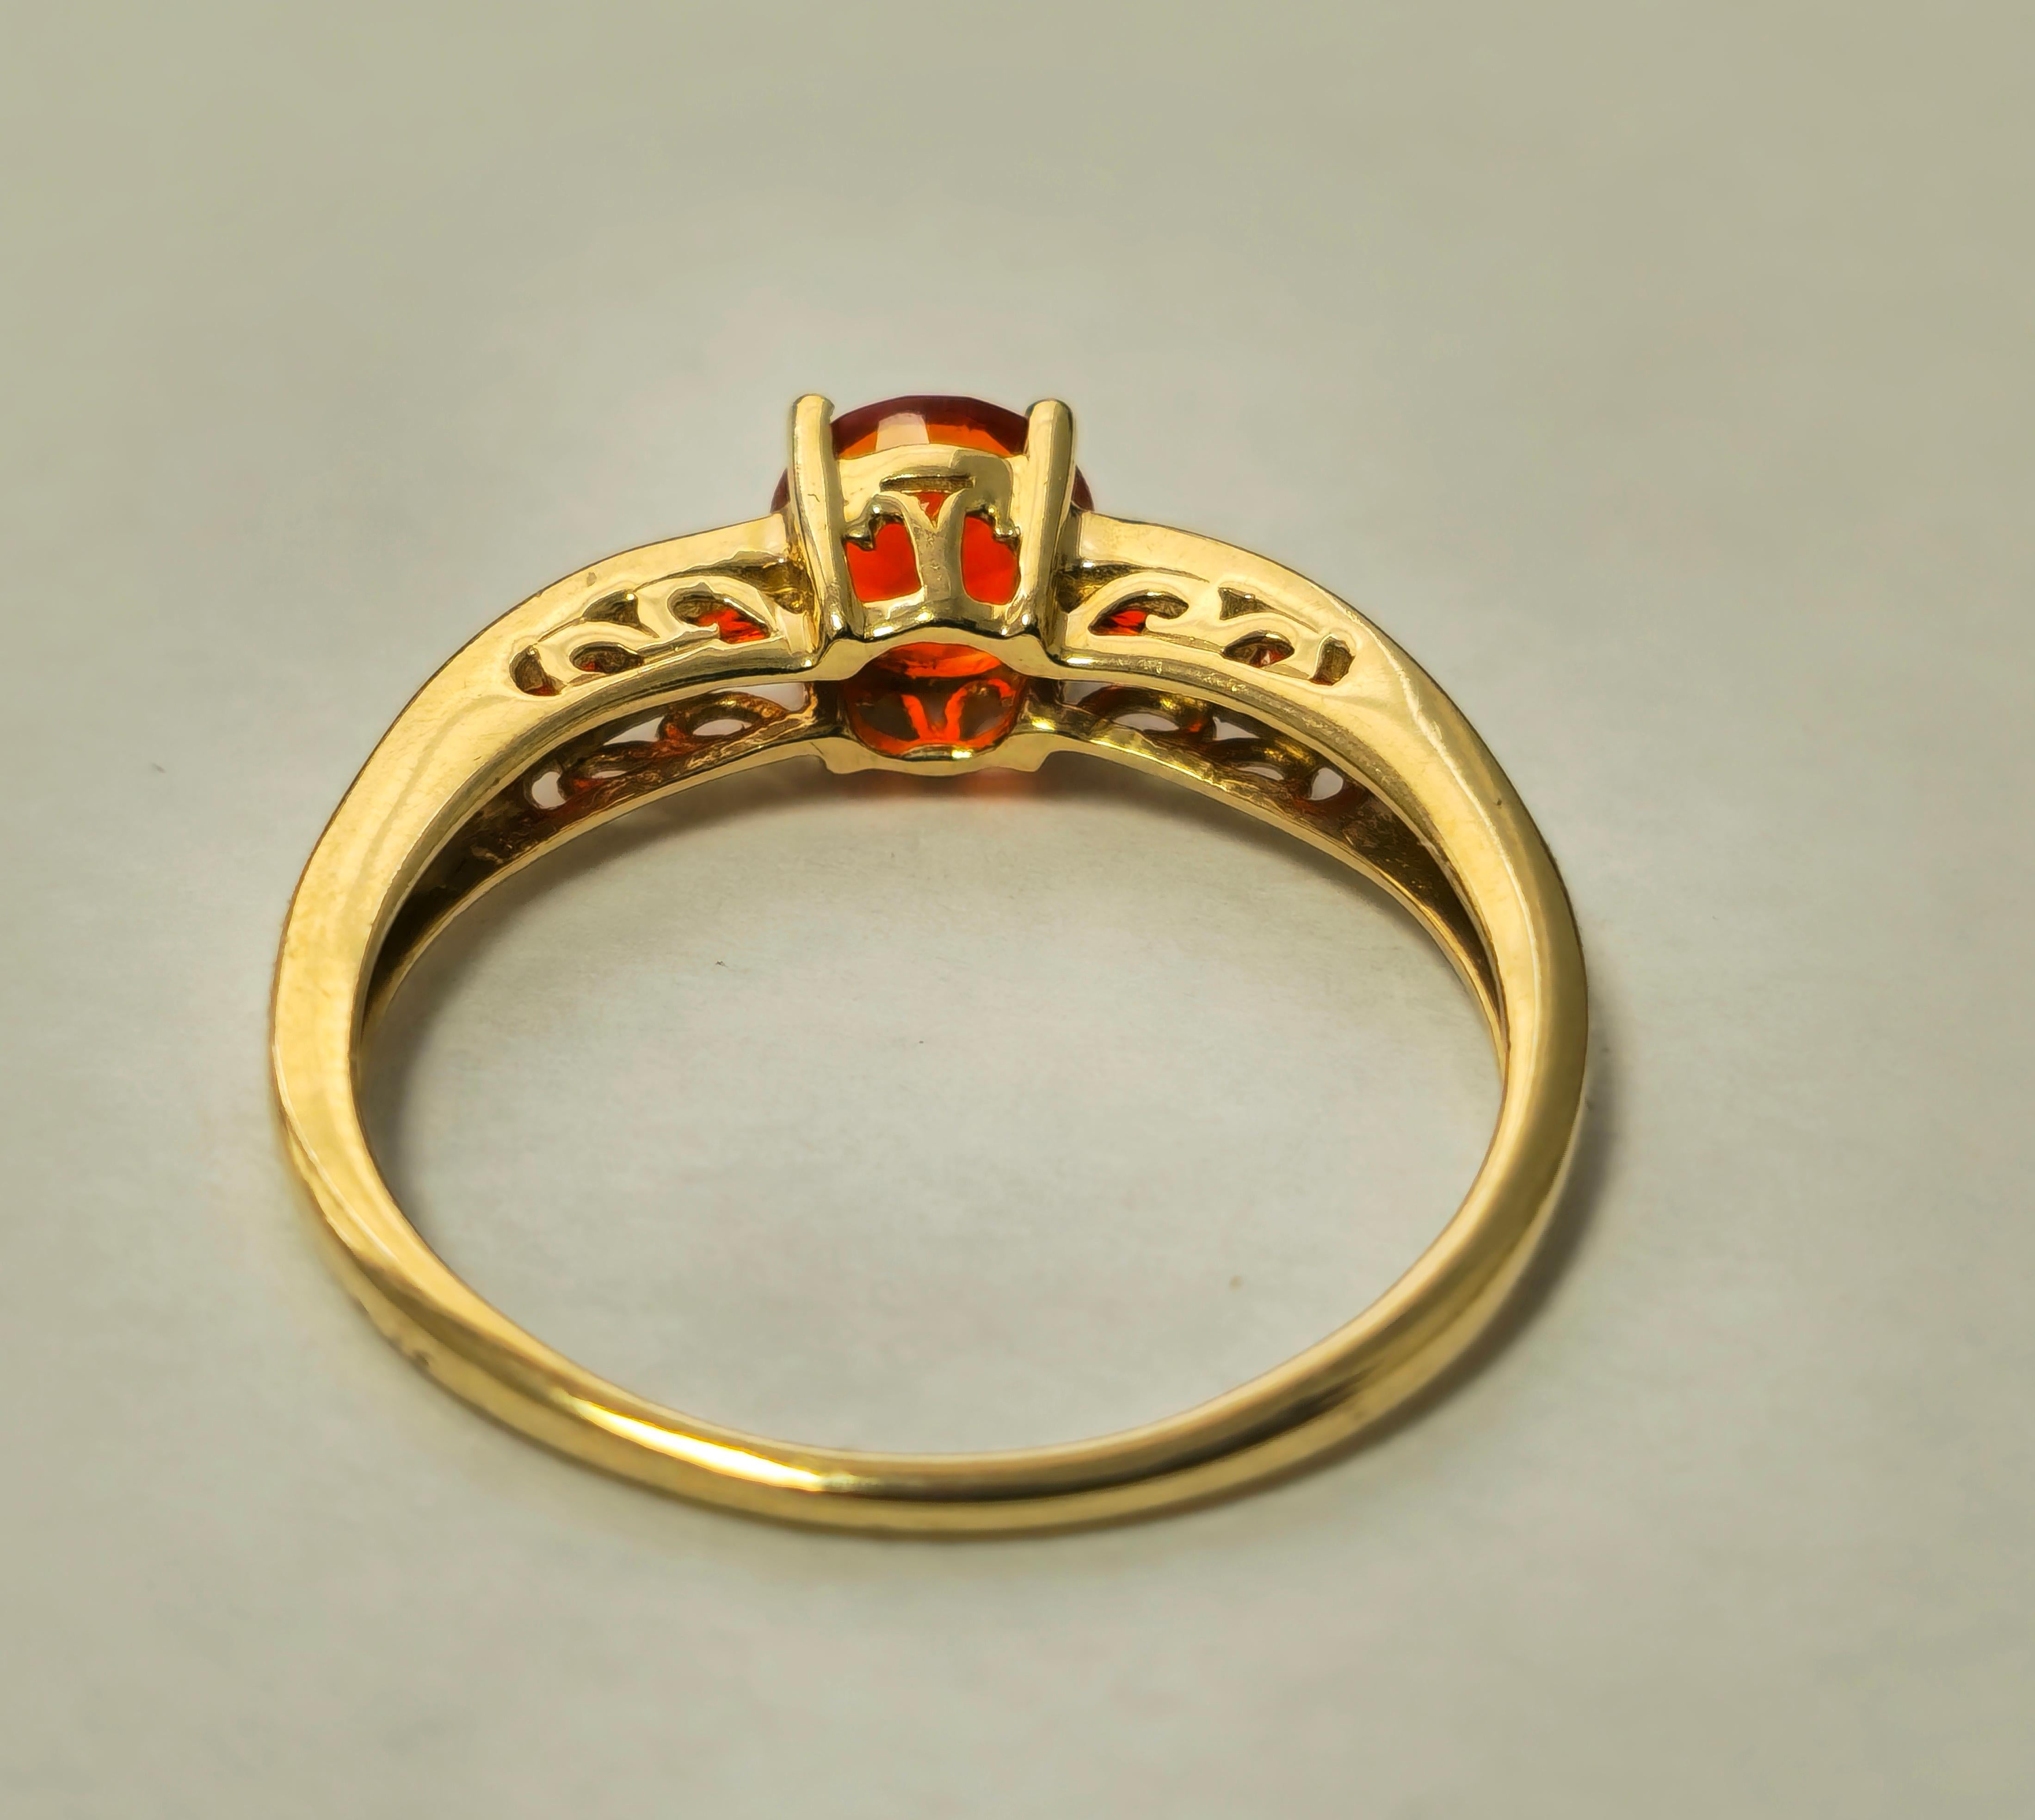 Indulge in radiant warmth with our 14k Yellow Gold Orange Sapphire Ring, showcasing a total gemstone weight of 1.90 carats. Each round-shaped sapphire exudes a vibrant hue, set elegantly in 14k yellow gold. With a total weight of 2.40 grams and a